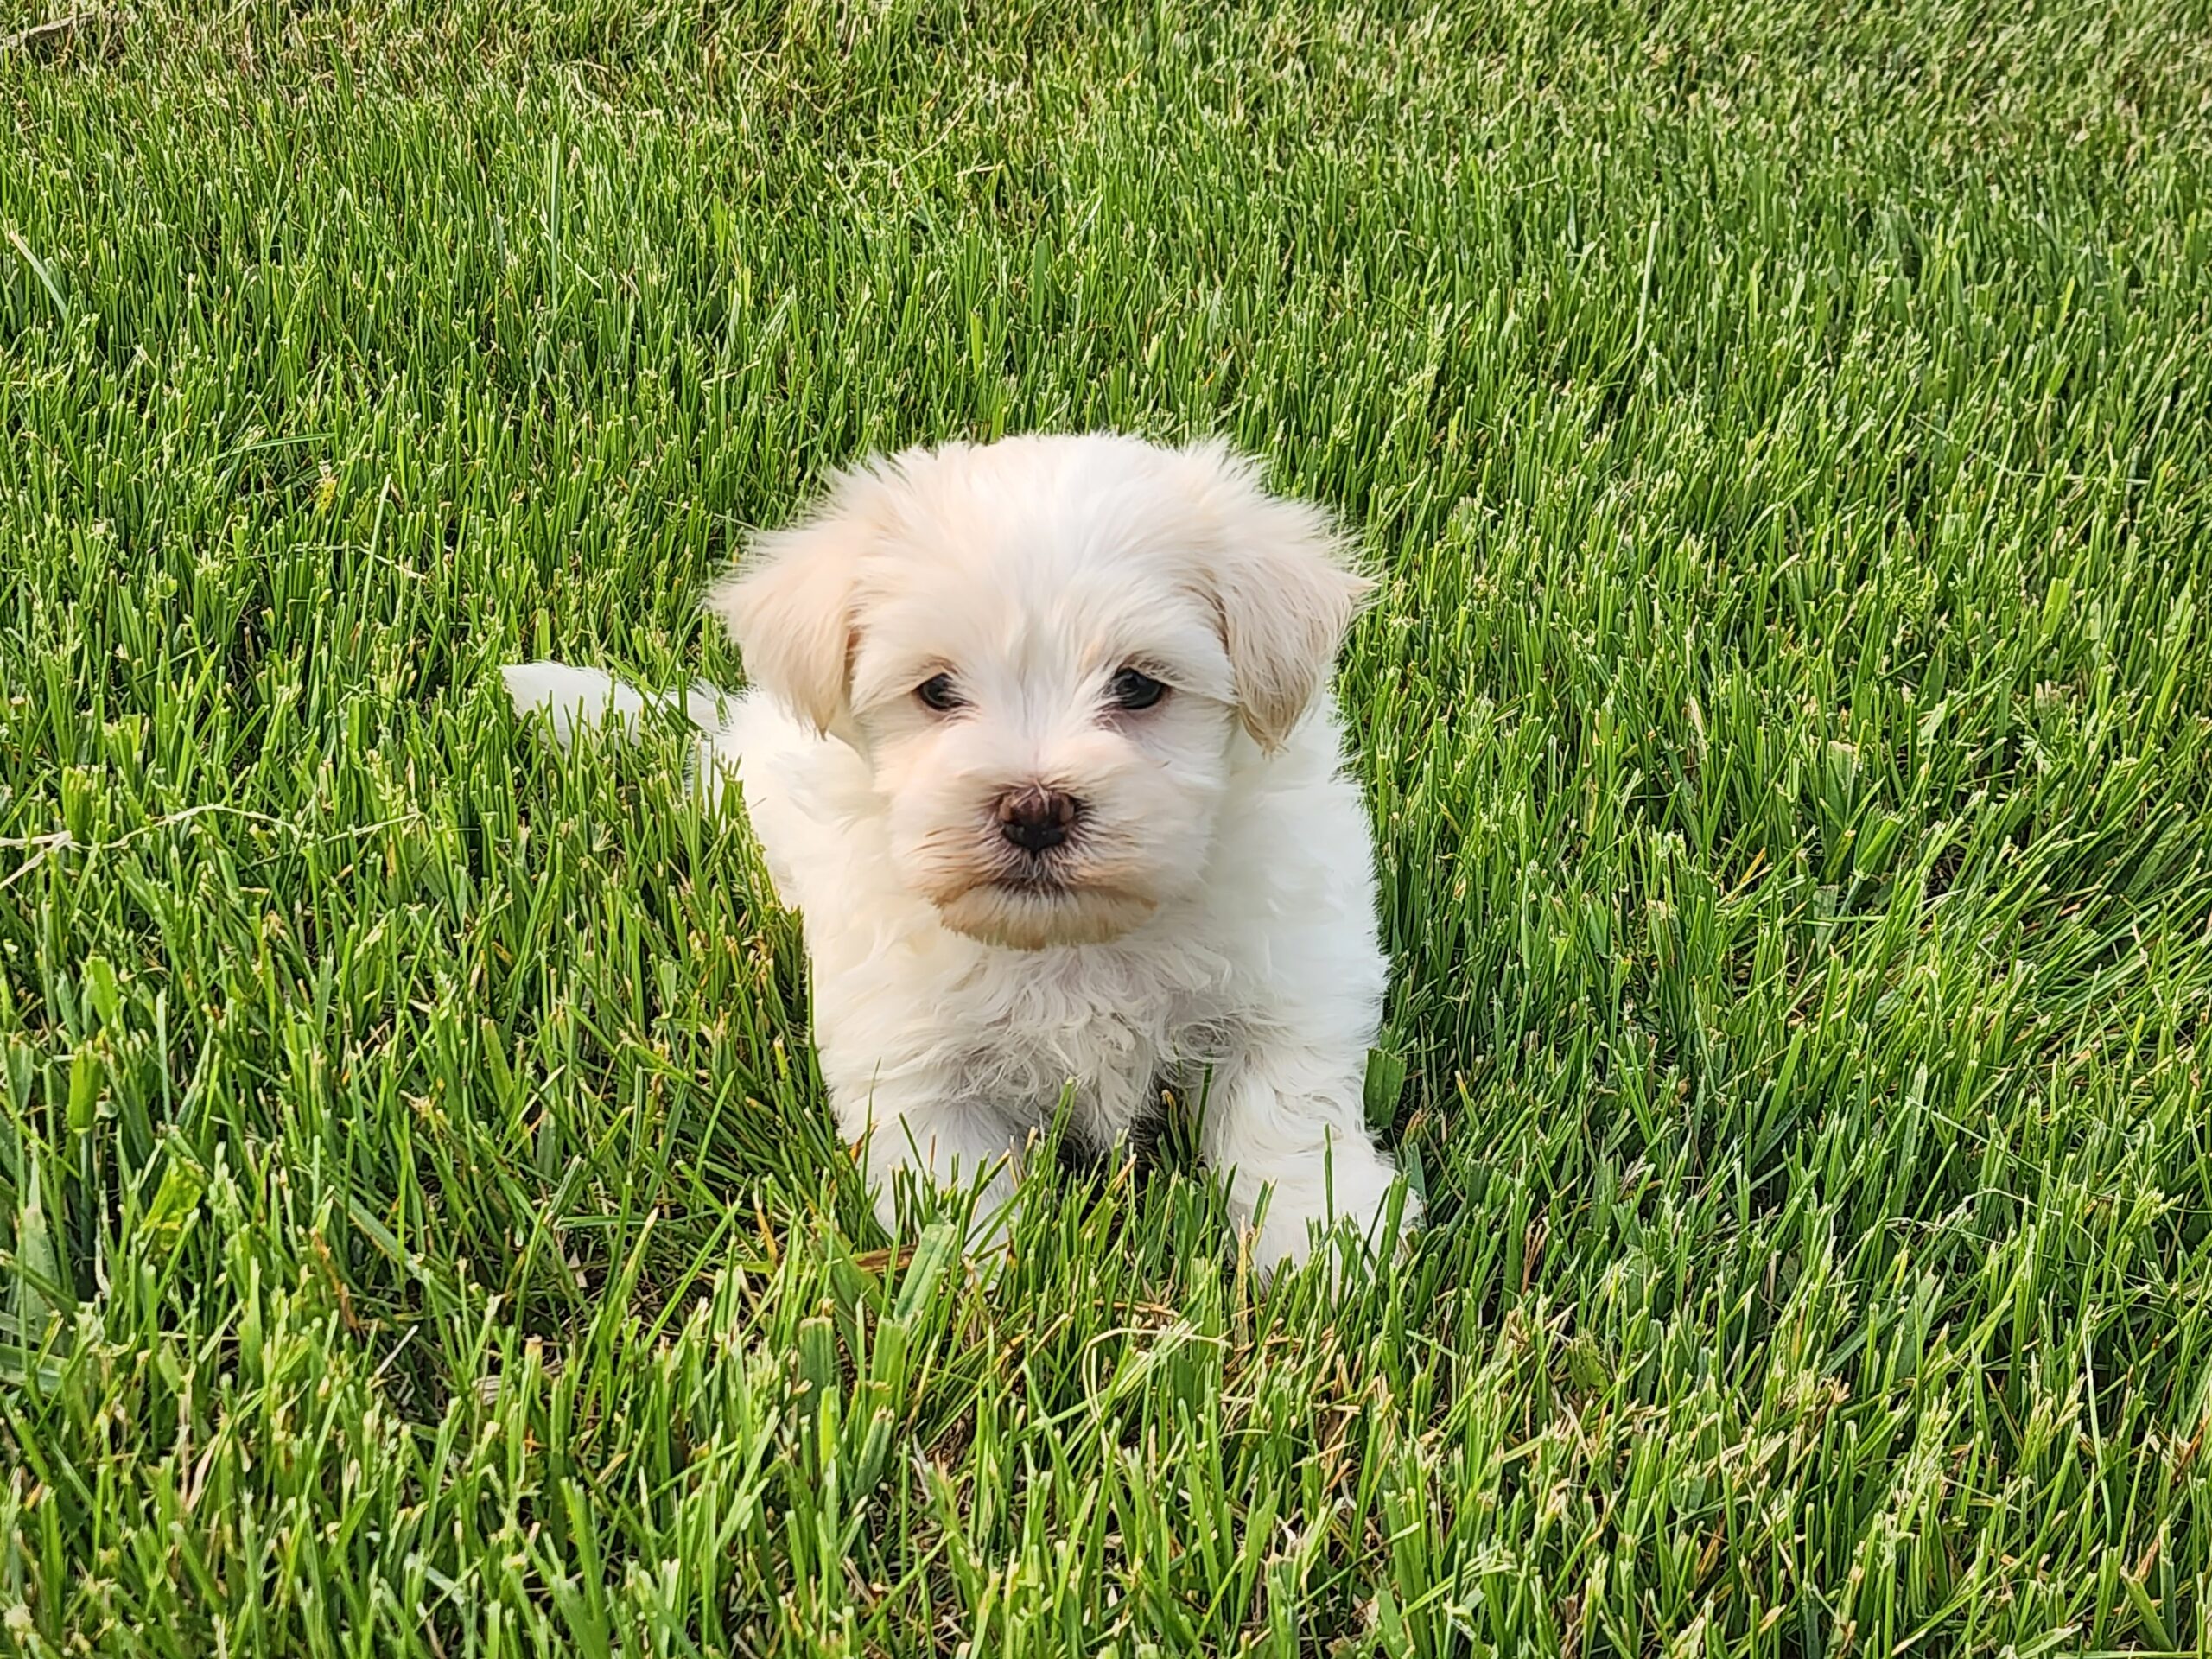 "Henry" DOB: 4/3/23. Breed: Havanese. Sex: Male. Available June 1. Price: $800.  
*He has a slight underbite.